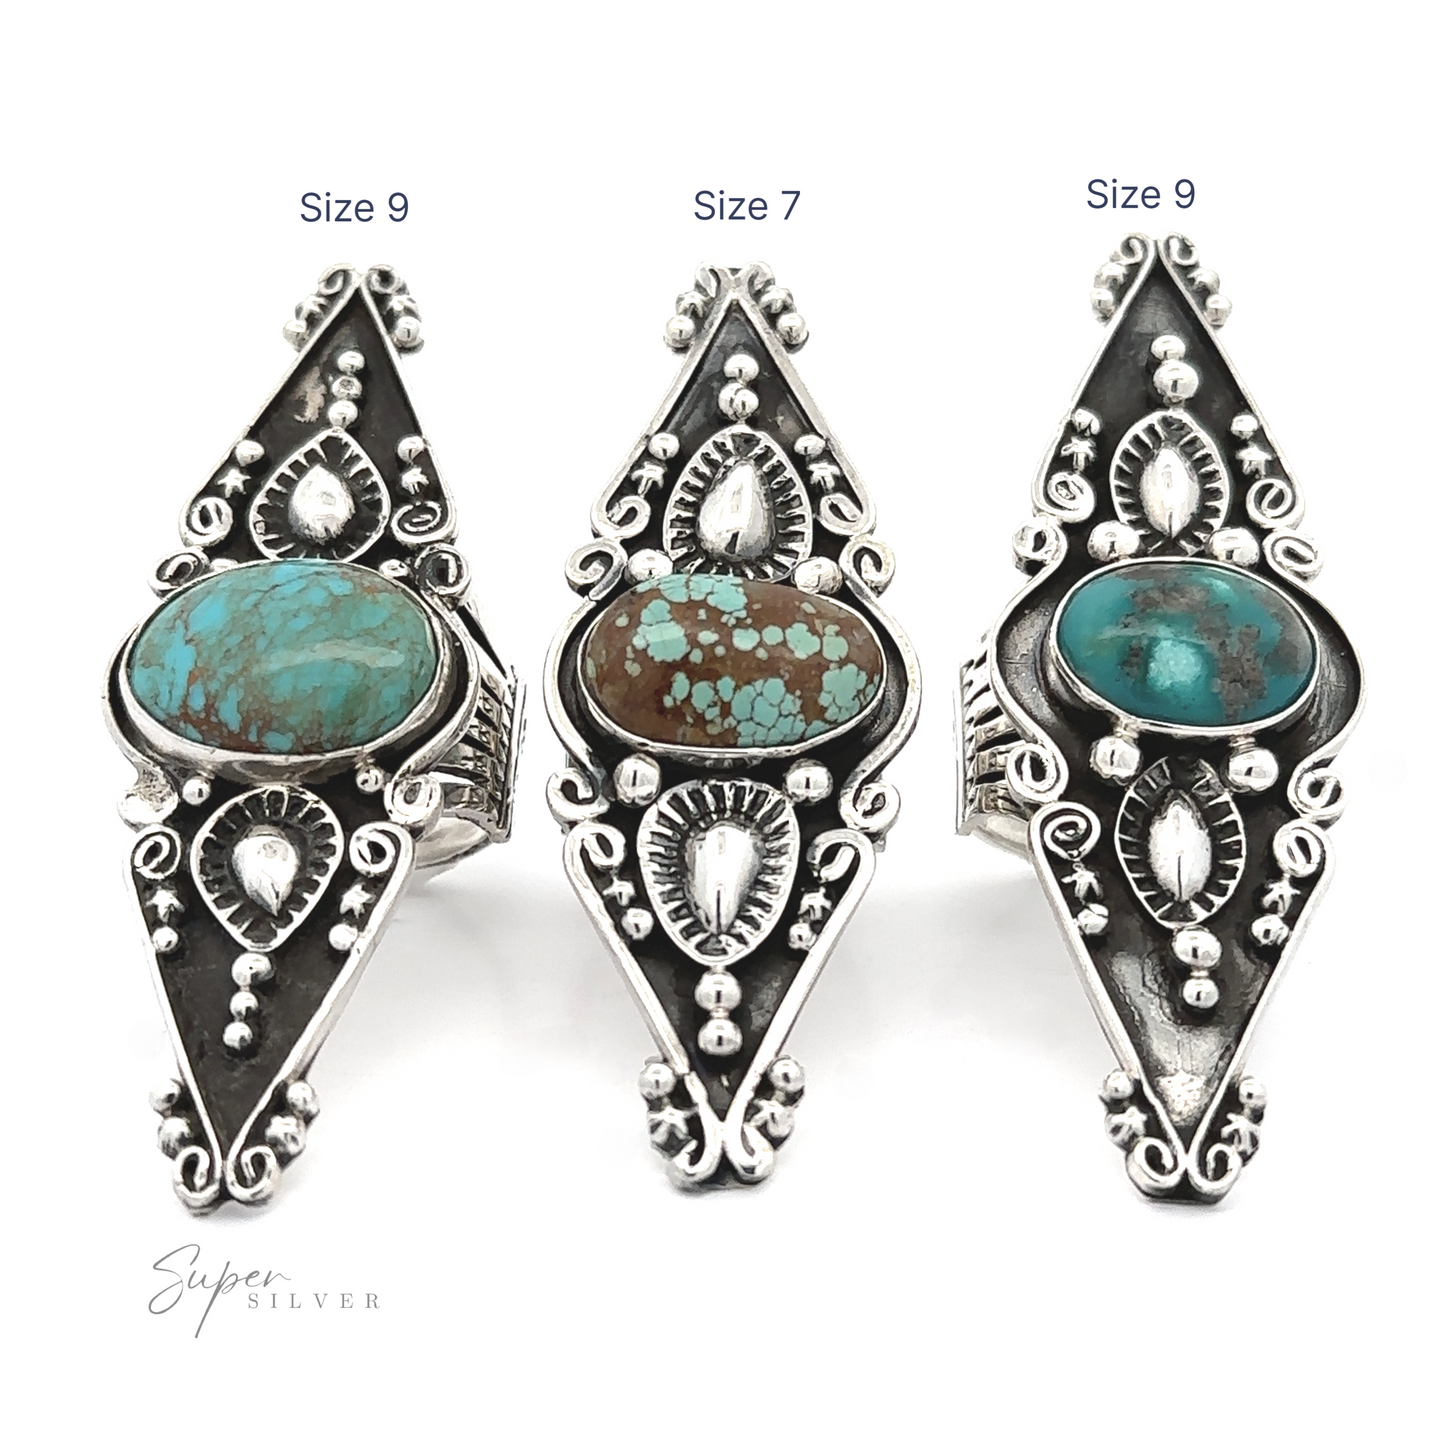 
                  
                    Three turquoise and silver Stunning Native American statement rings in different sizes, displayed with labels indicating sizes 9 and 7, featuring intricate Southwest artistry.
                  
                